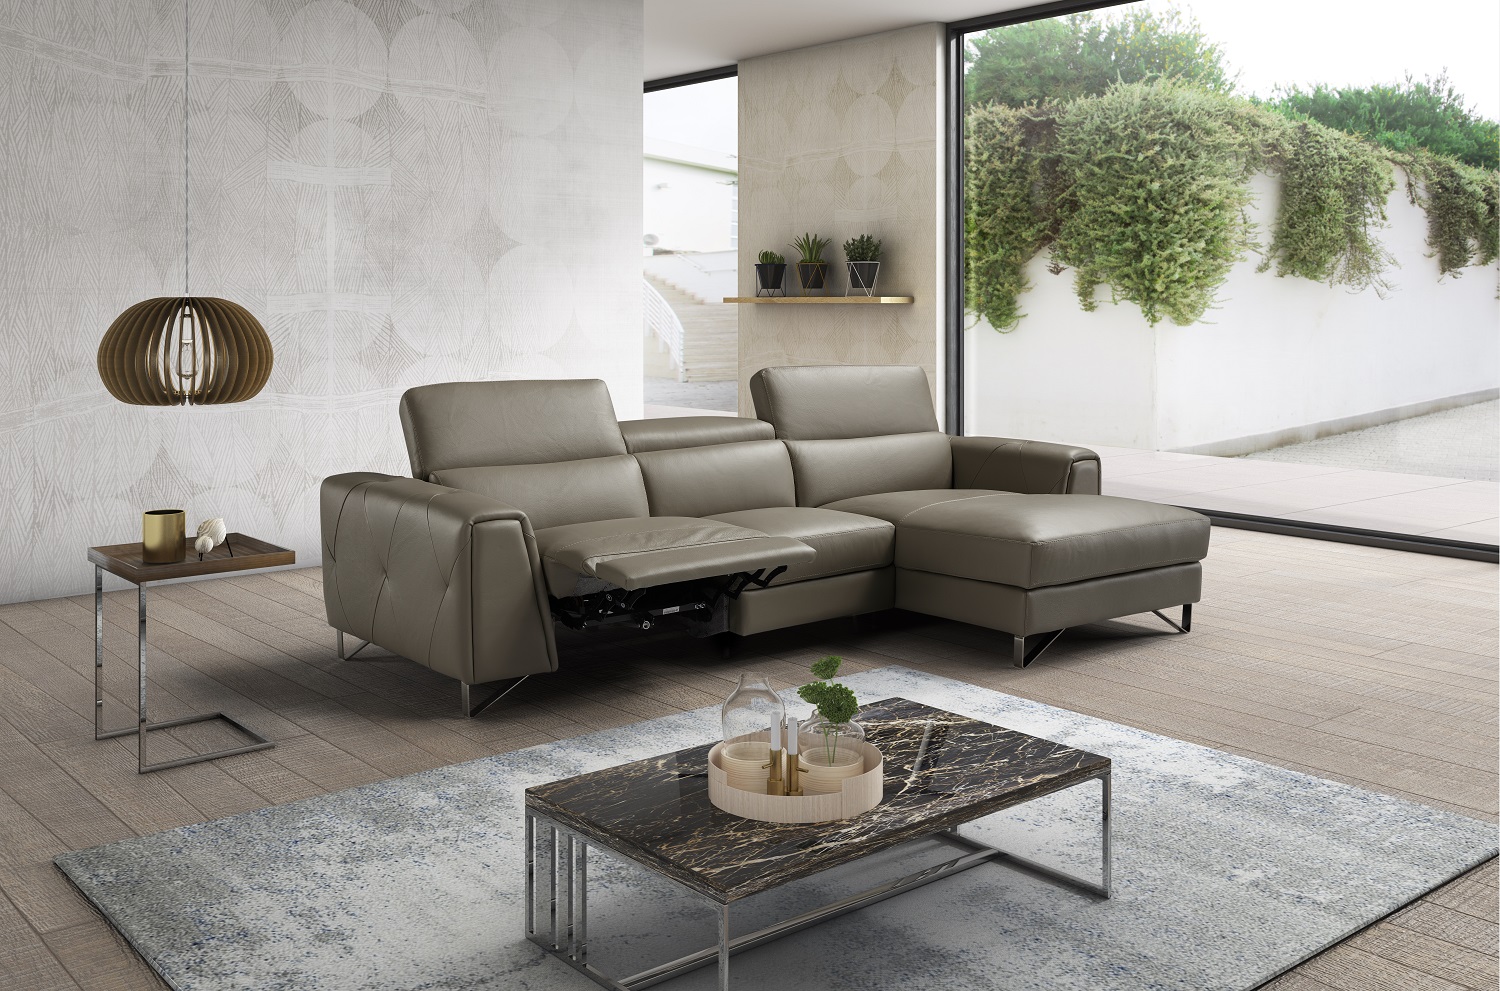 Italian Made Taupe Full Leather Sectional Sofa with Adjustable Headrest